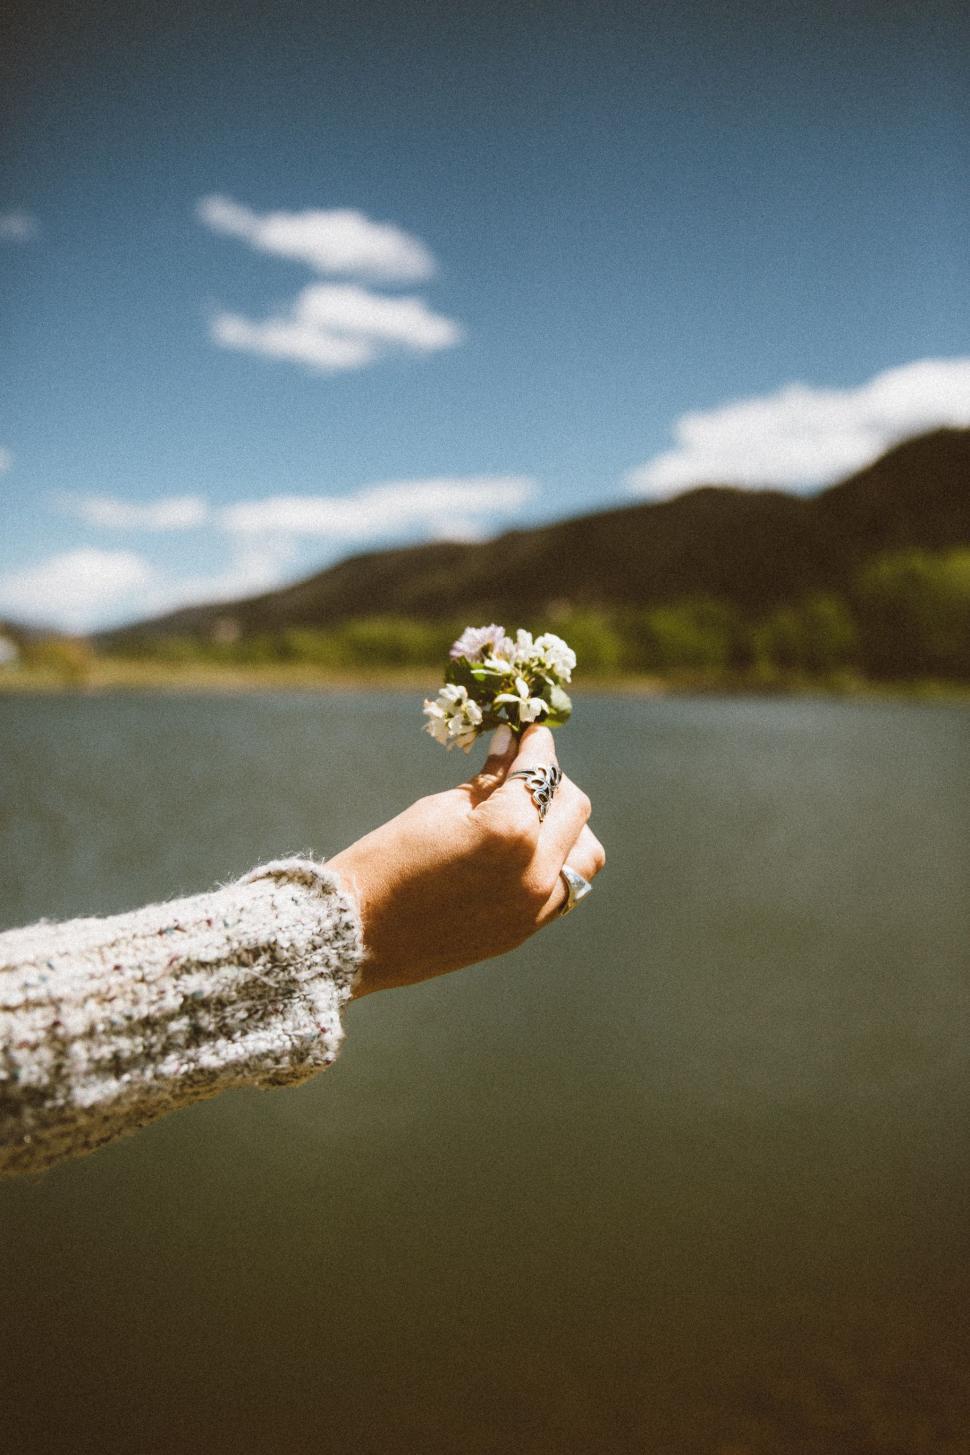 Free Image of Person Holding Flower in Hand 